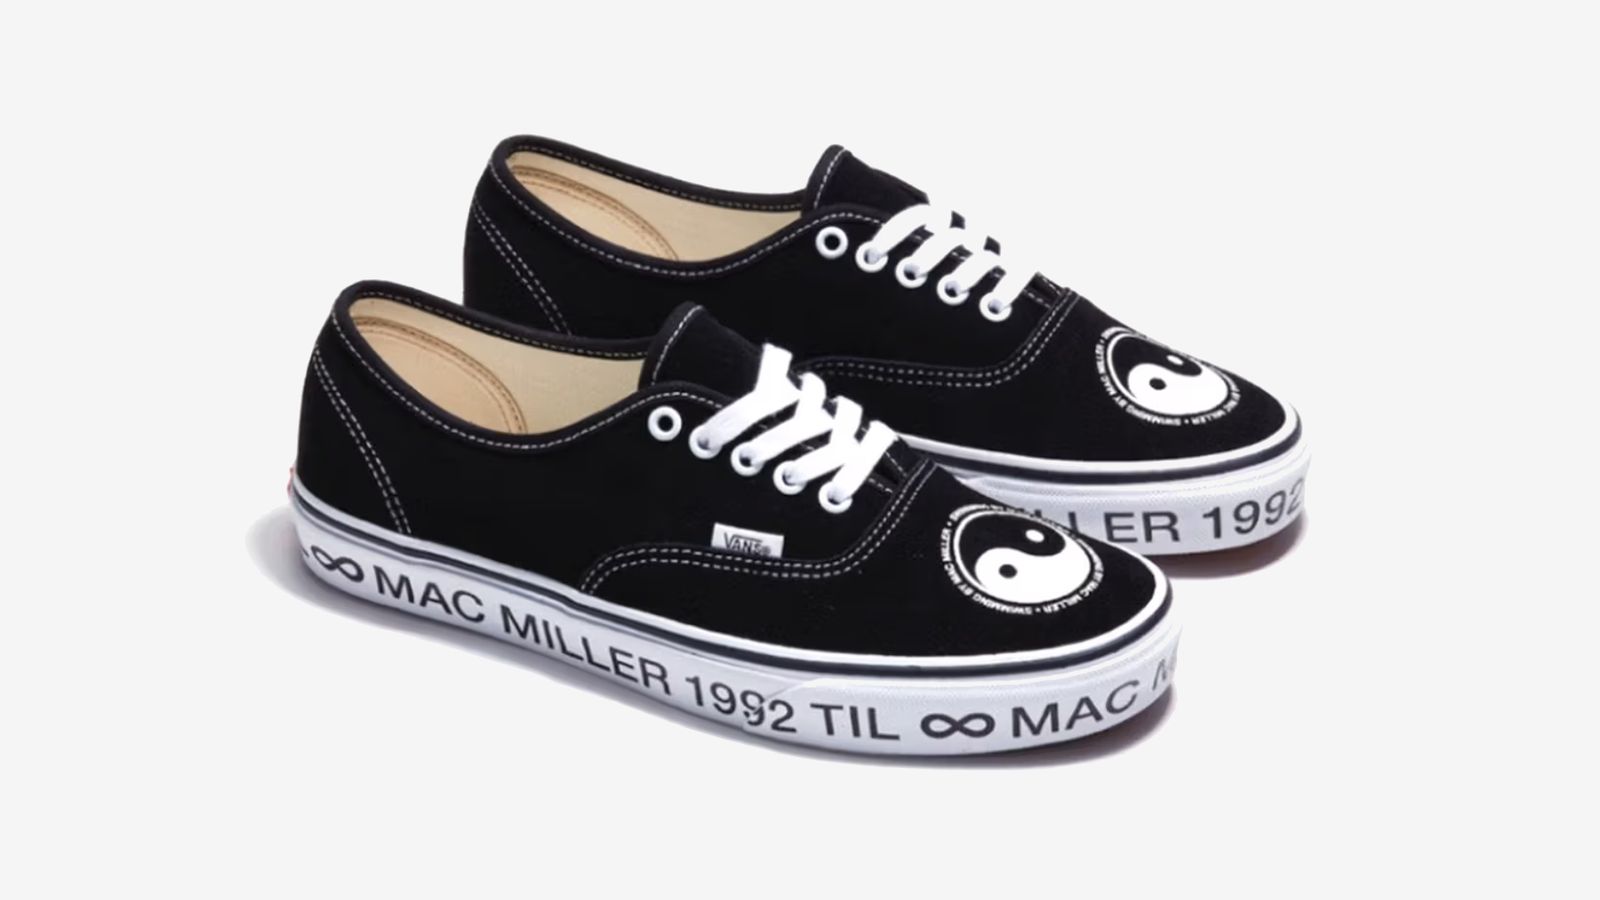 Mac Miller x Vans Authentic "Swimming" product image of a black pair of Authentics with white laces and sole, including Mac Miller branding across the midsole and a yin yang symbol on the toeboxes.